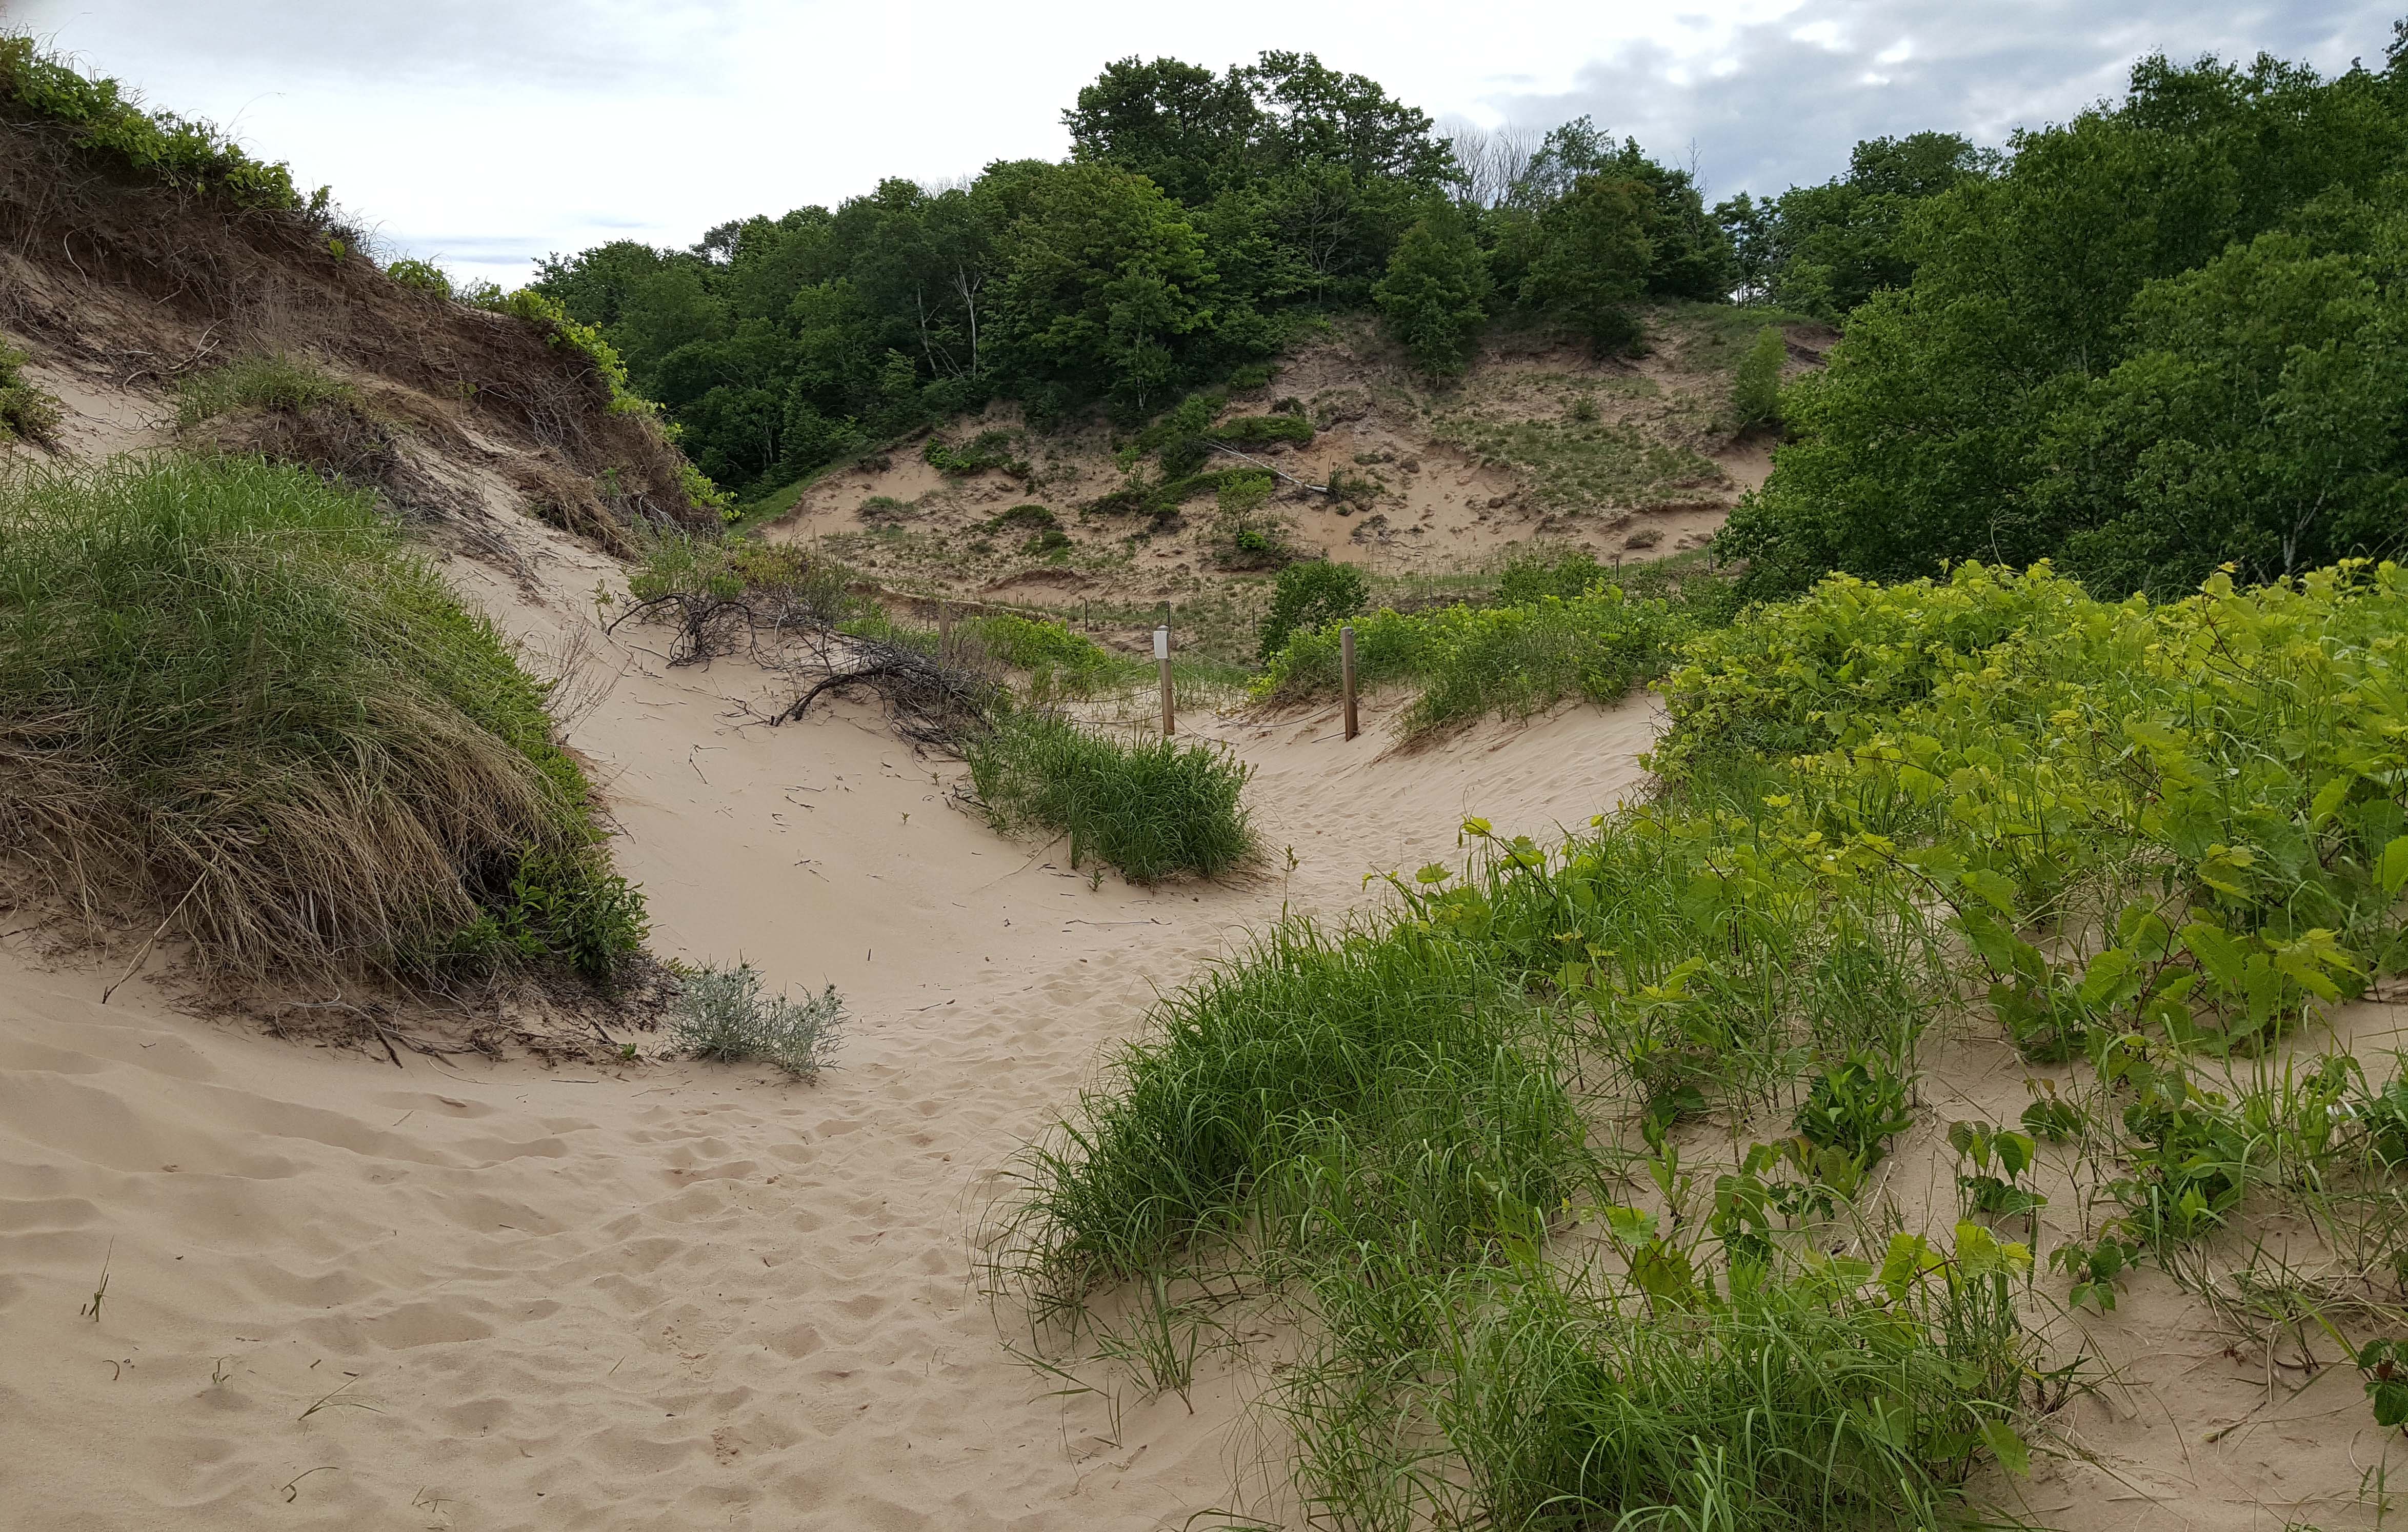 Paths through the Ever-Changing Dunes